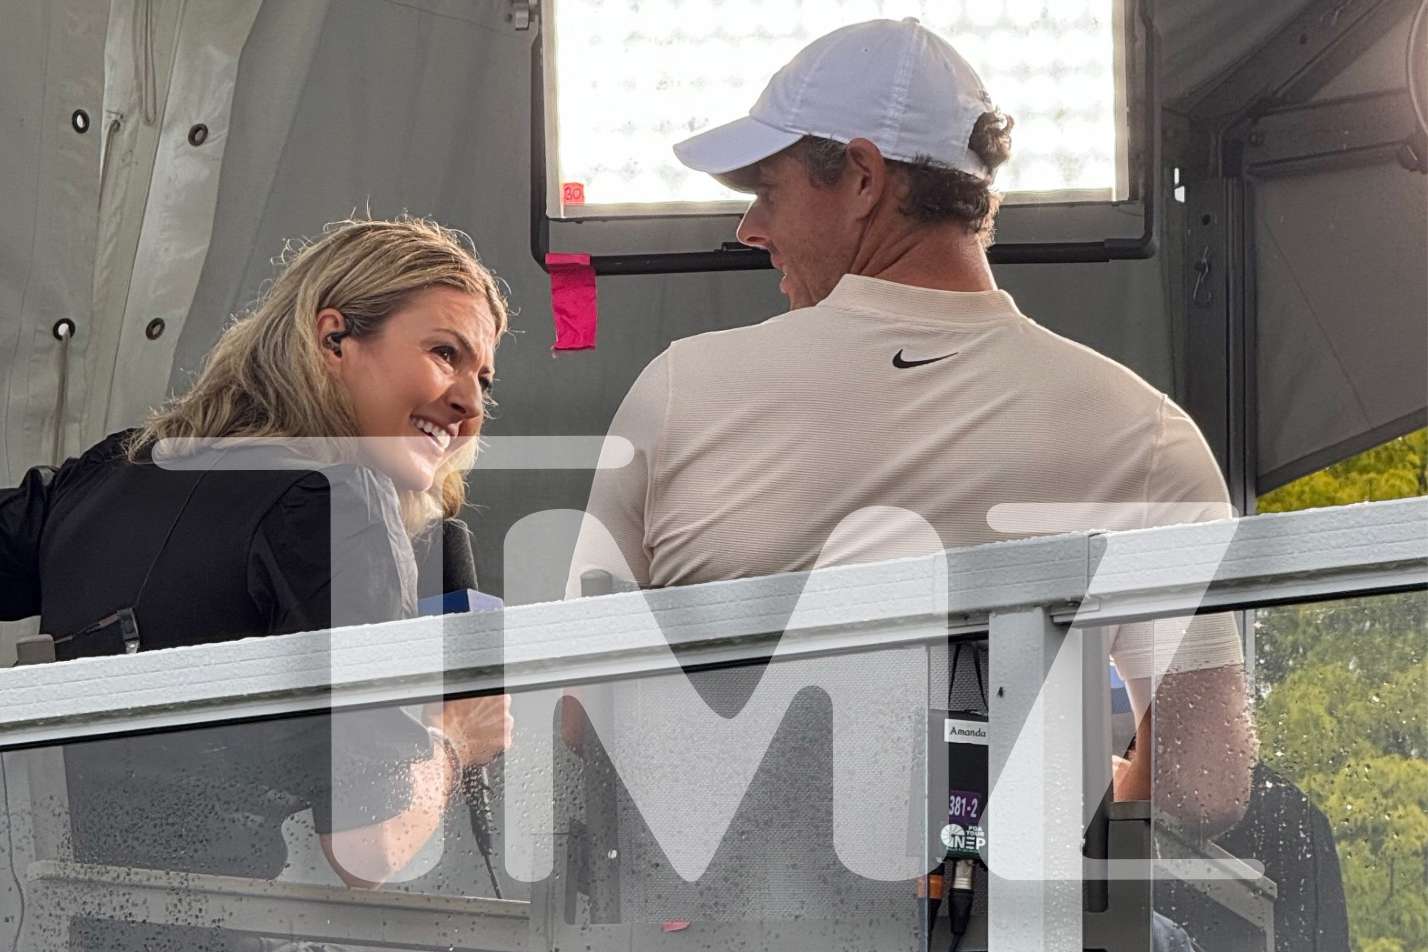 Rory McIlroy Spotted Hugging Amanda Balionis at Canadian Open After Filing for Divorce from Erica Stoll